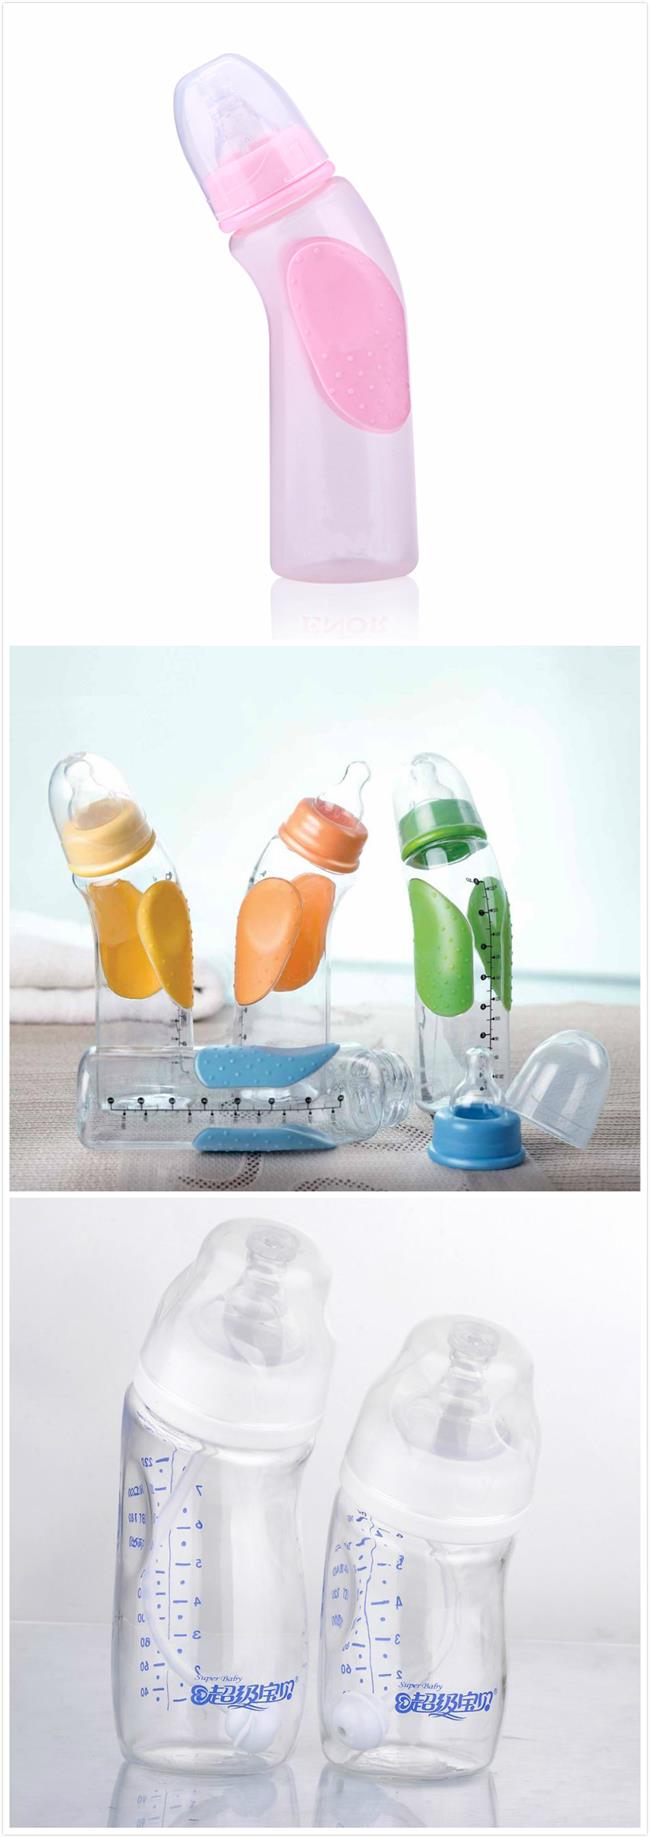 New Products! Hot Selling PP Material 240ml Anti-Slip Baby Feeding Bottle